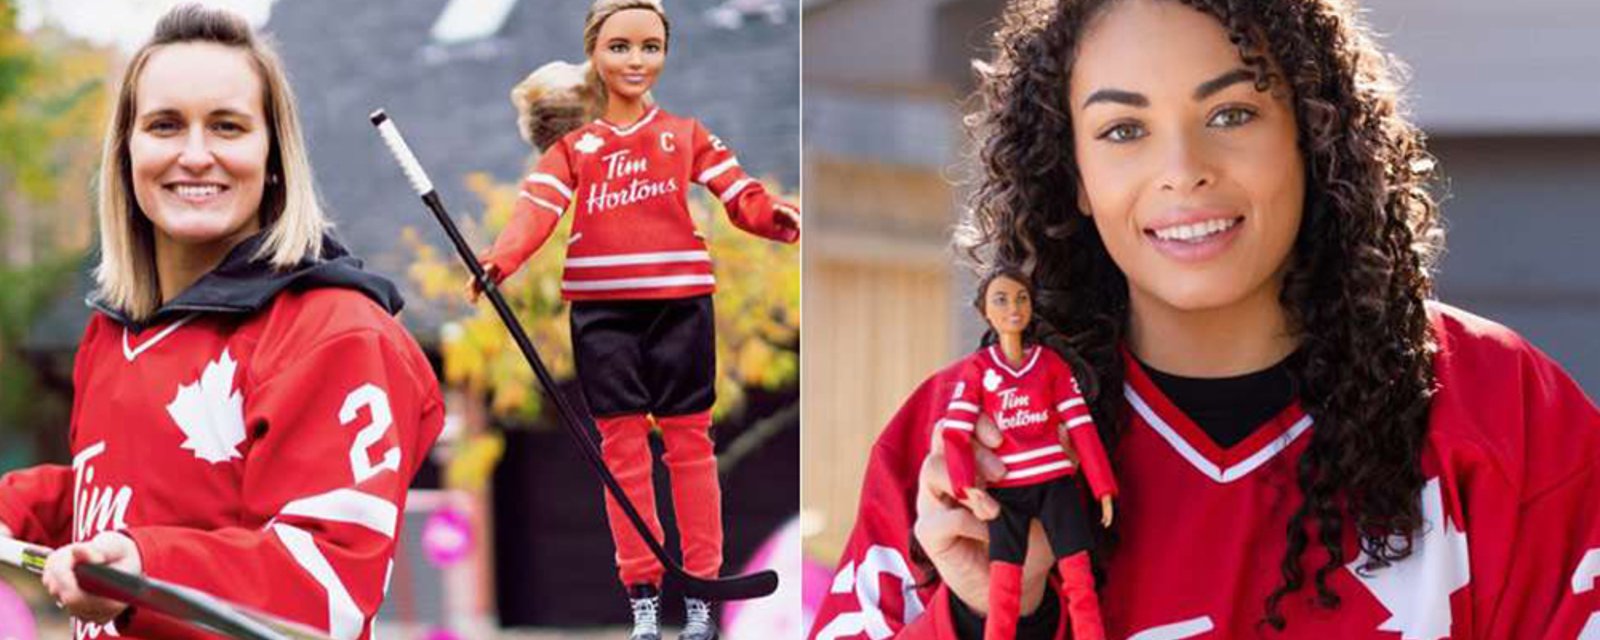 Tim Hortons partners with Mattel to create hockey-playing Barbie